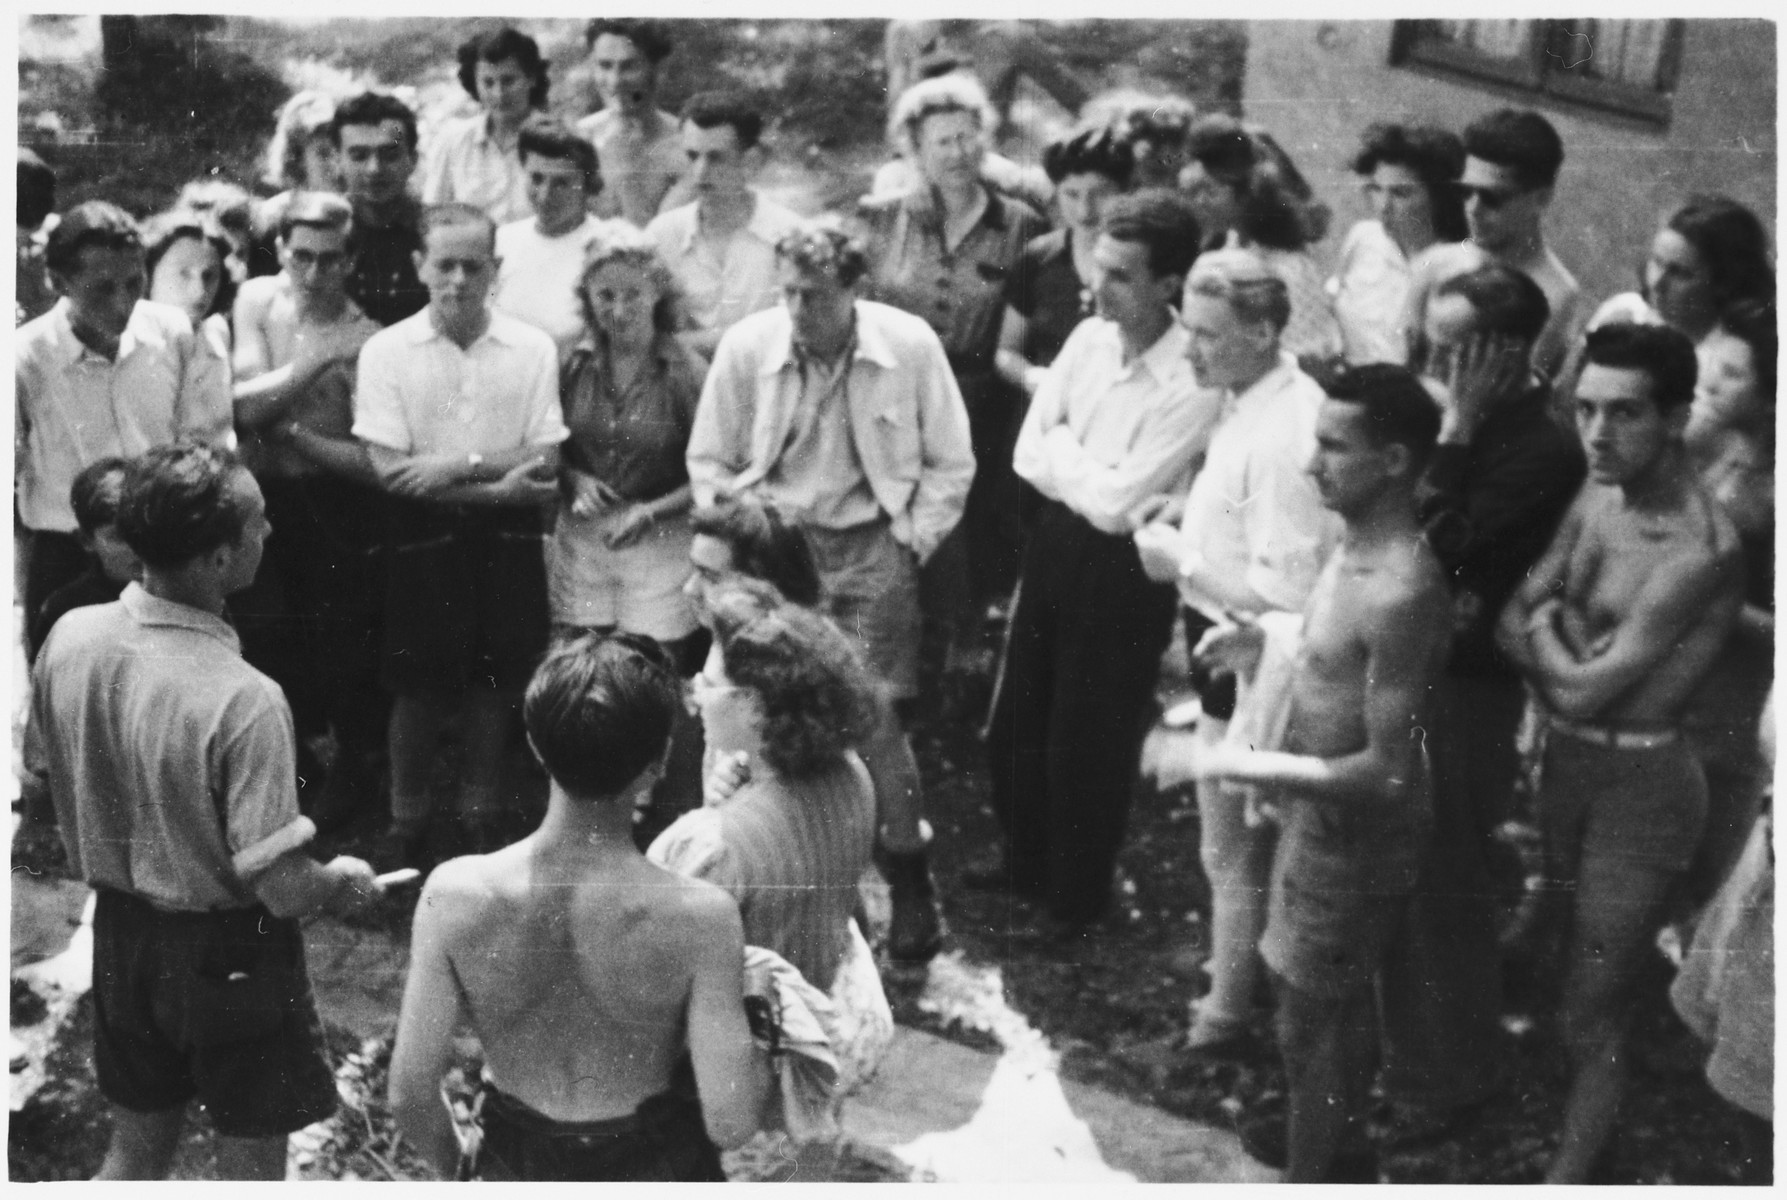 Otto Giniewski (Toto) addresses members of the French Jewish resistance group MJS (Zionist Youth Movement).

Among those pictured are Paul Giniewski, Joseph Fuks, Maurice Hausner, Tony Green, Georges Schneck, Jeanne Latchiver, Harry (Tzvi) Stein, Charlotte (last name unknown) and Michel Latchiver.